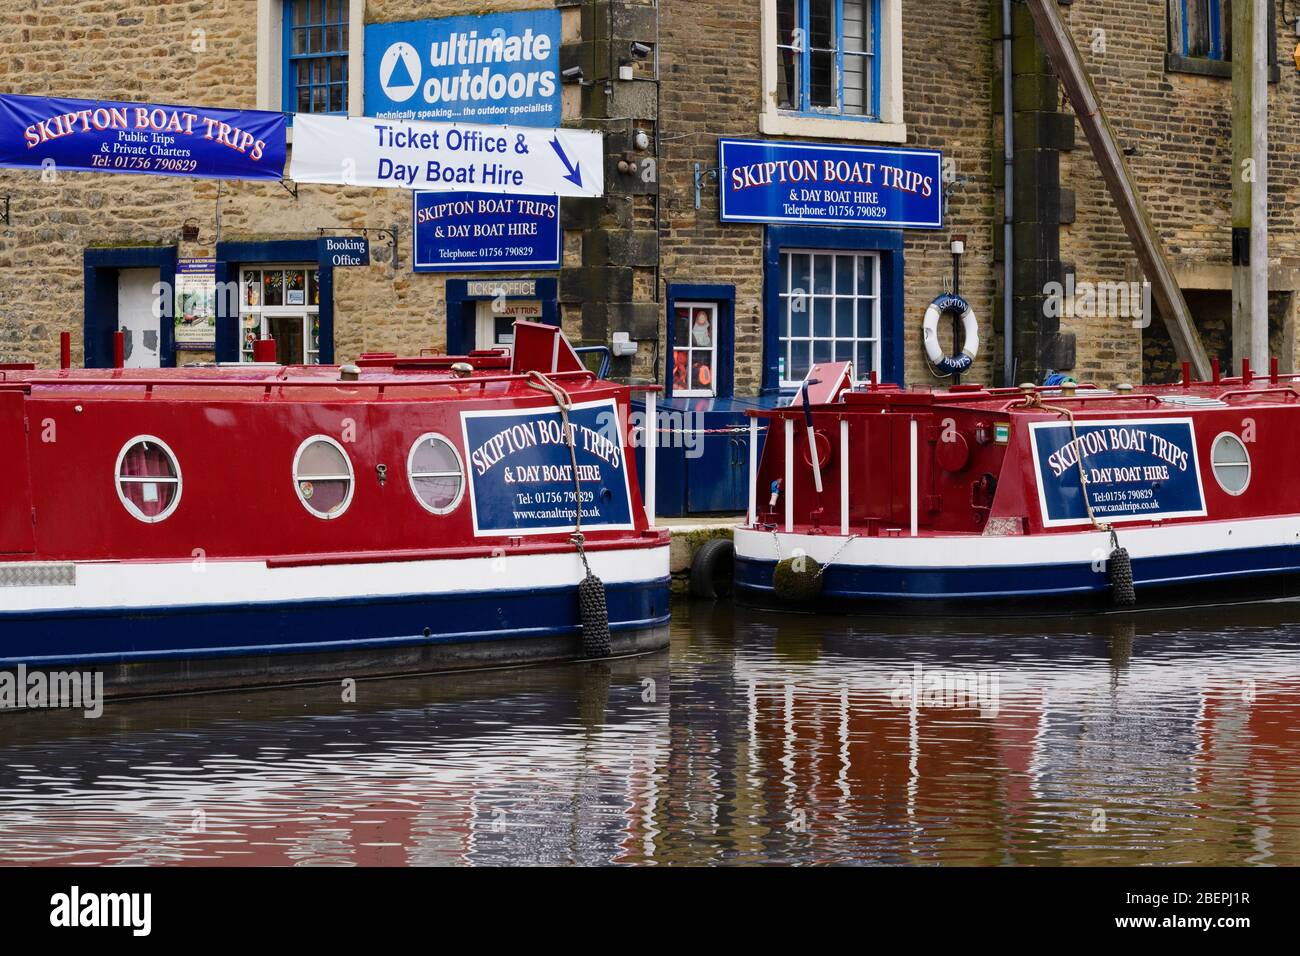 2 bright red blue canal narrow boats moored on water by boat hire business ticket office & banner - Leeds-Liverpool Canal, Skipton, Yorkshire, England Stock Photo